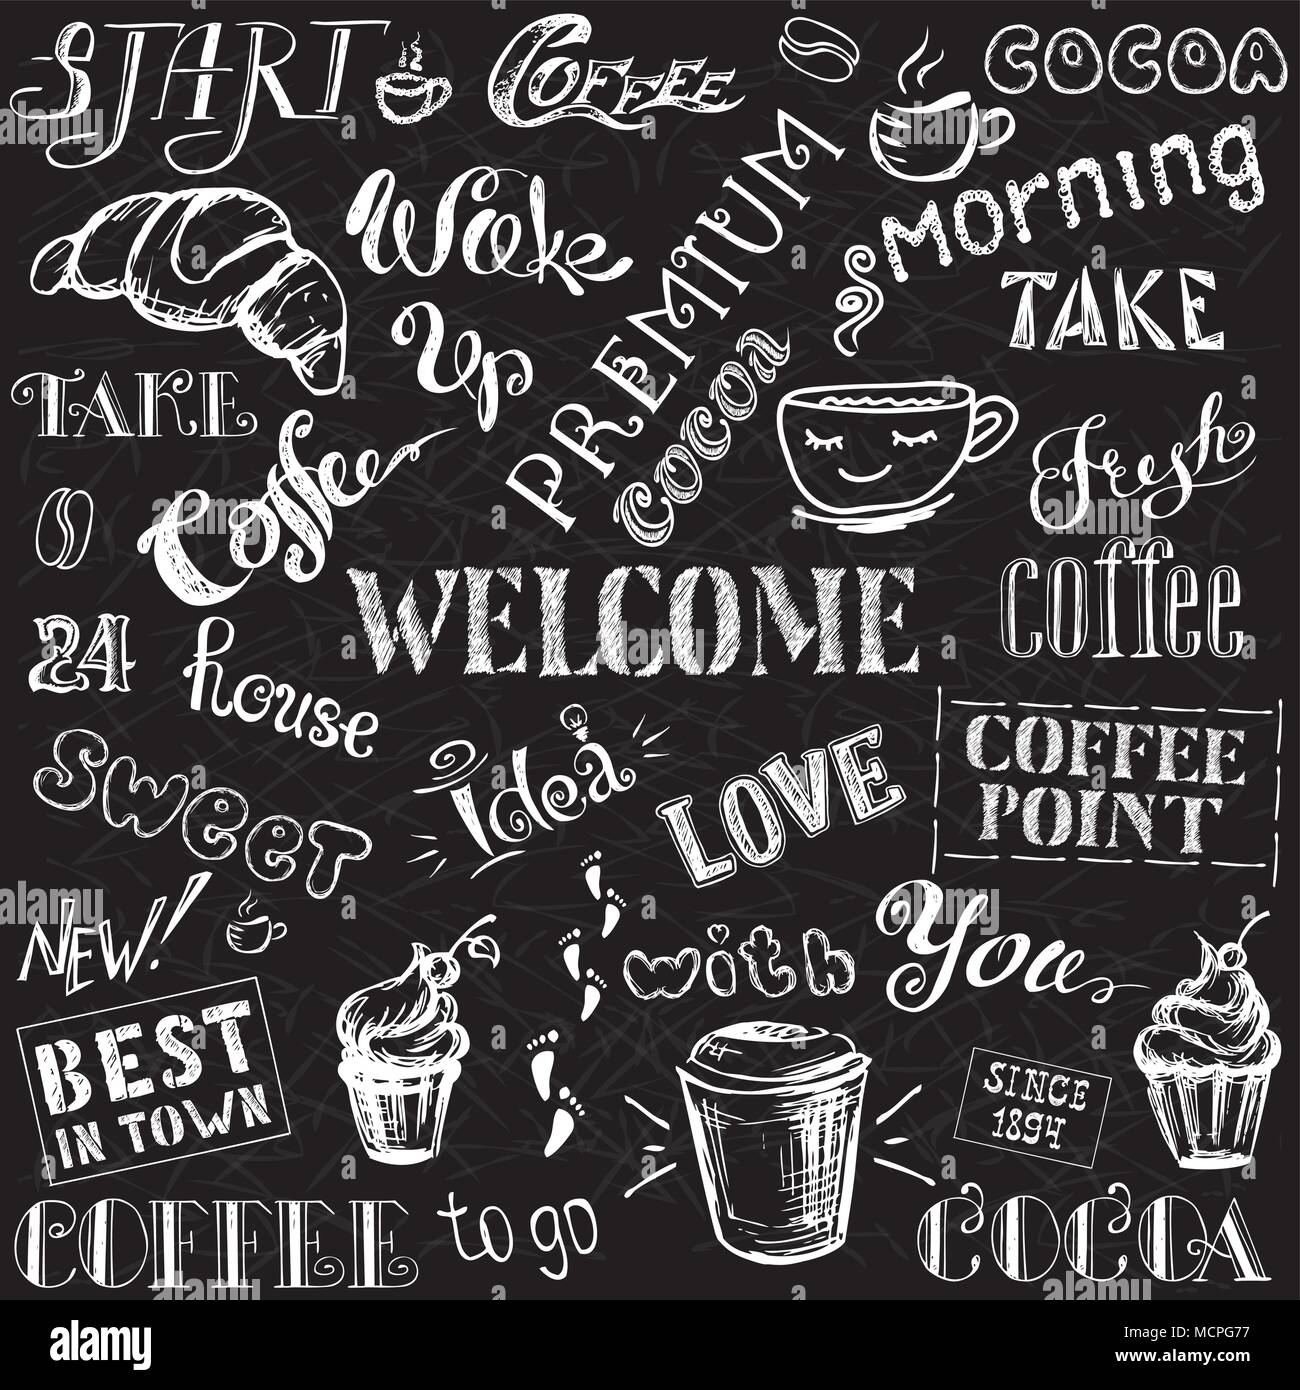 Coffee and cocoa - lettering,hand drawn on black background, stock vector illustration Stock Vector